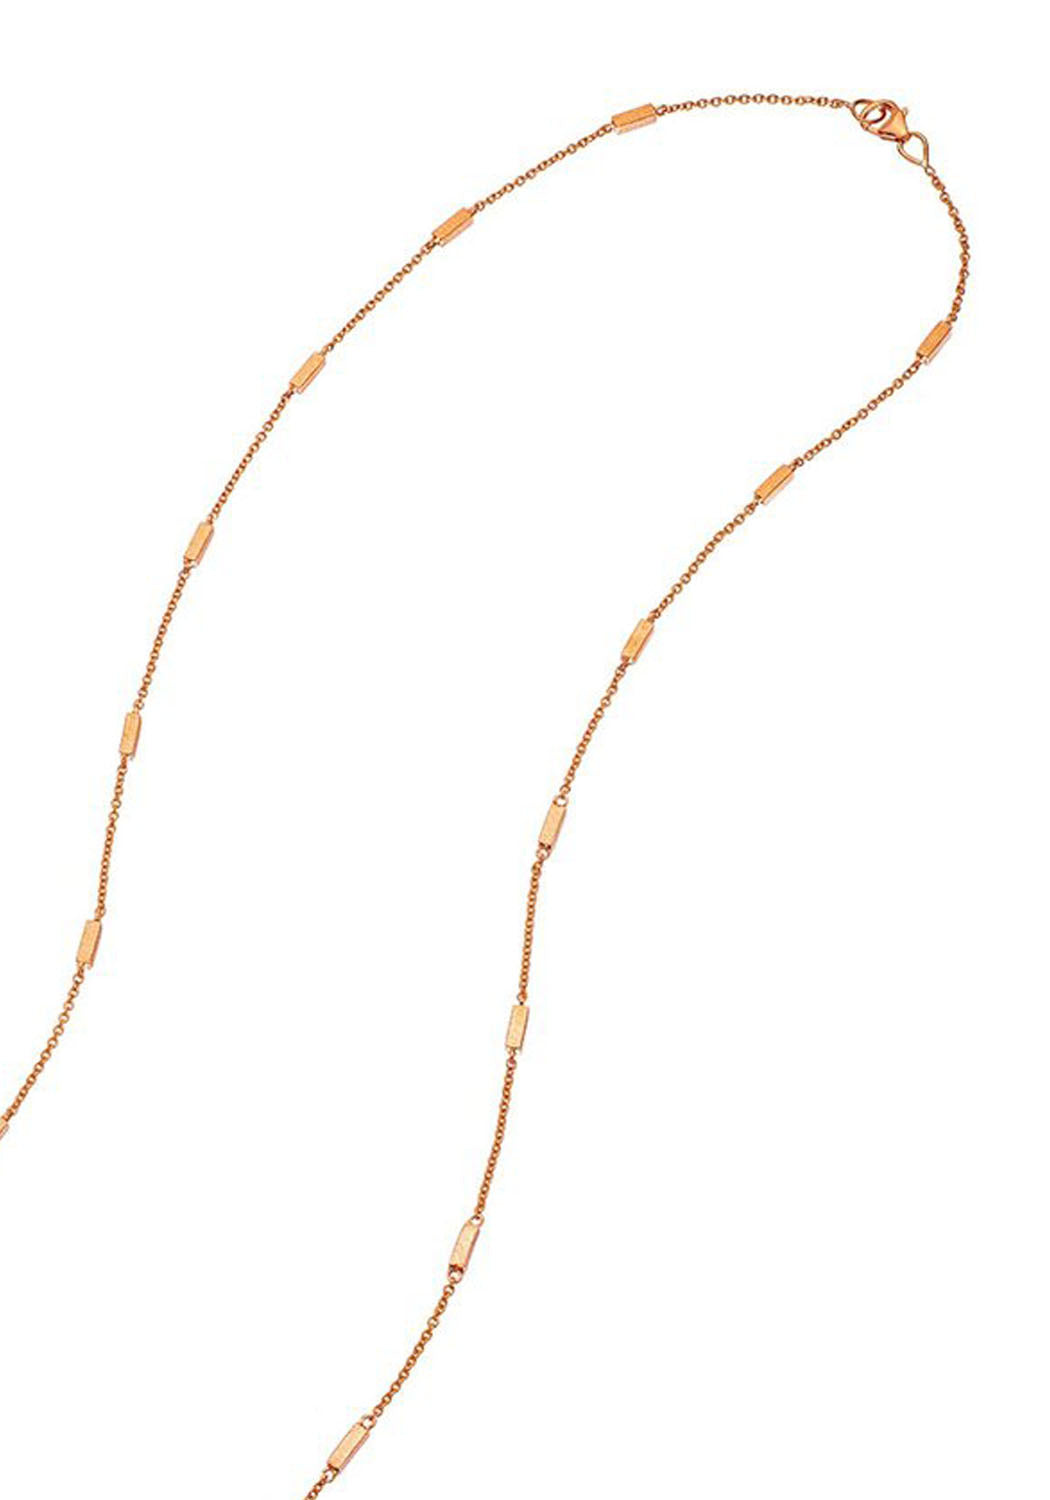 Sethi Couture 18K Rose Gold Barrel Chain Necklace | Ref. CH522-RG-20 | OsterJewelers.com